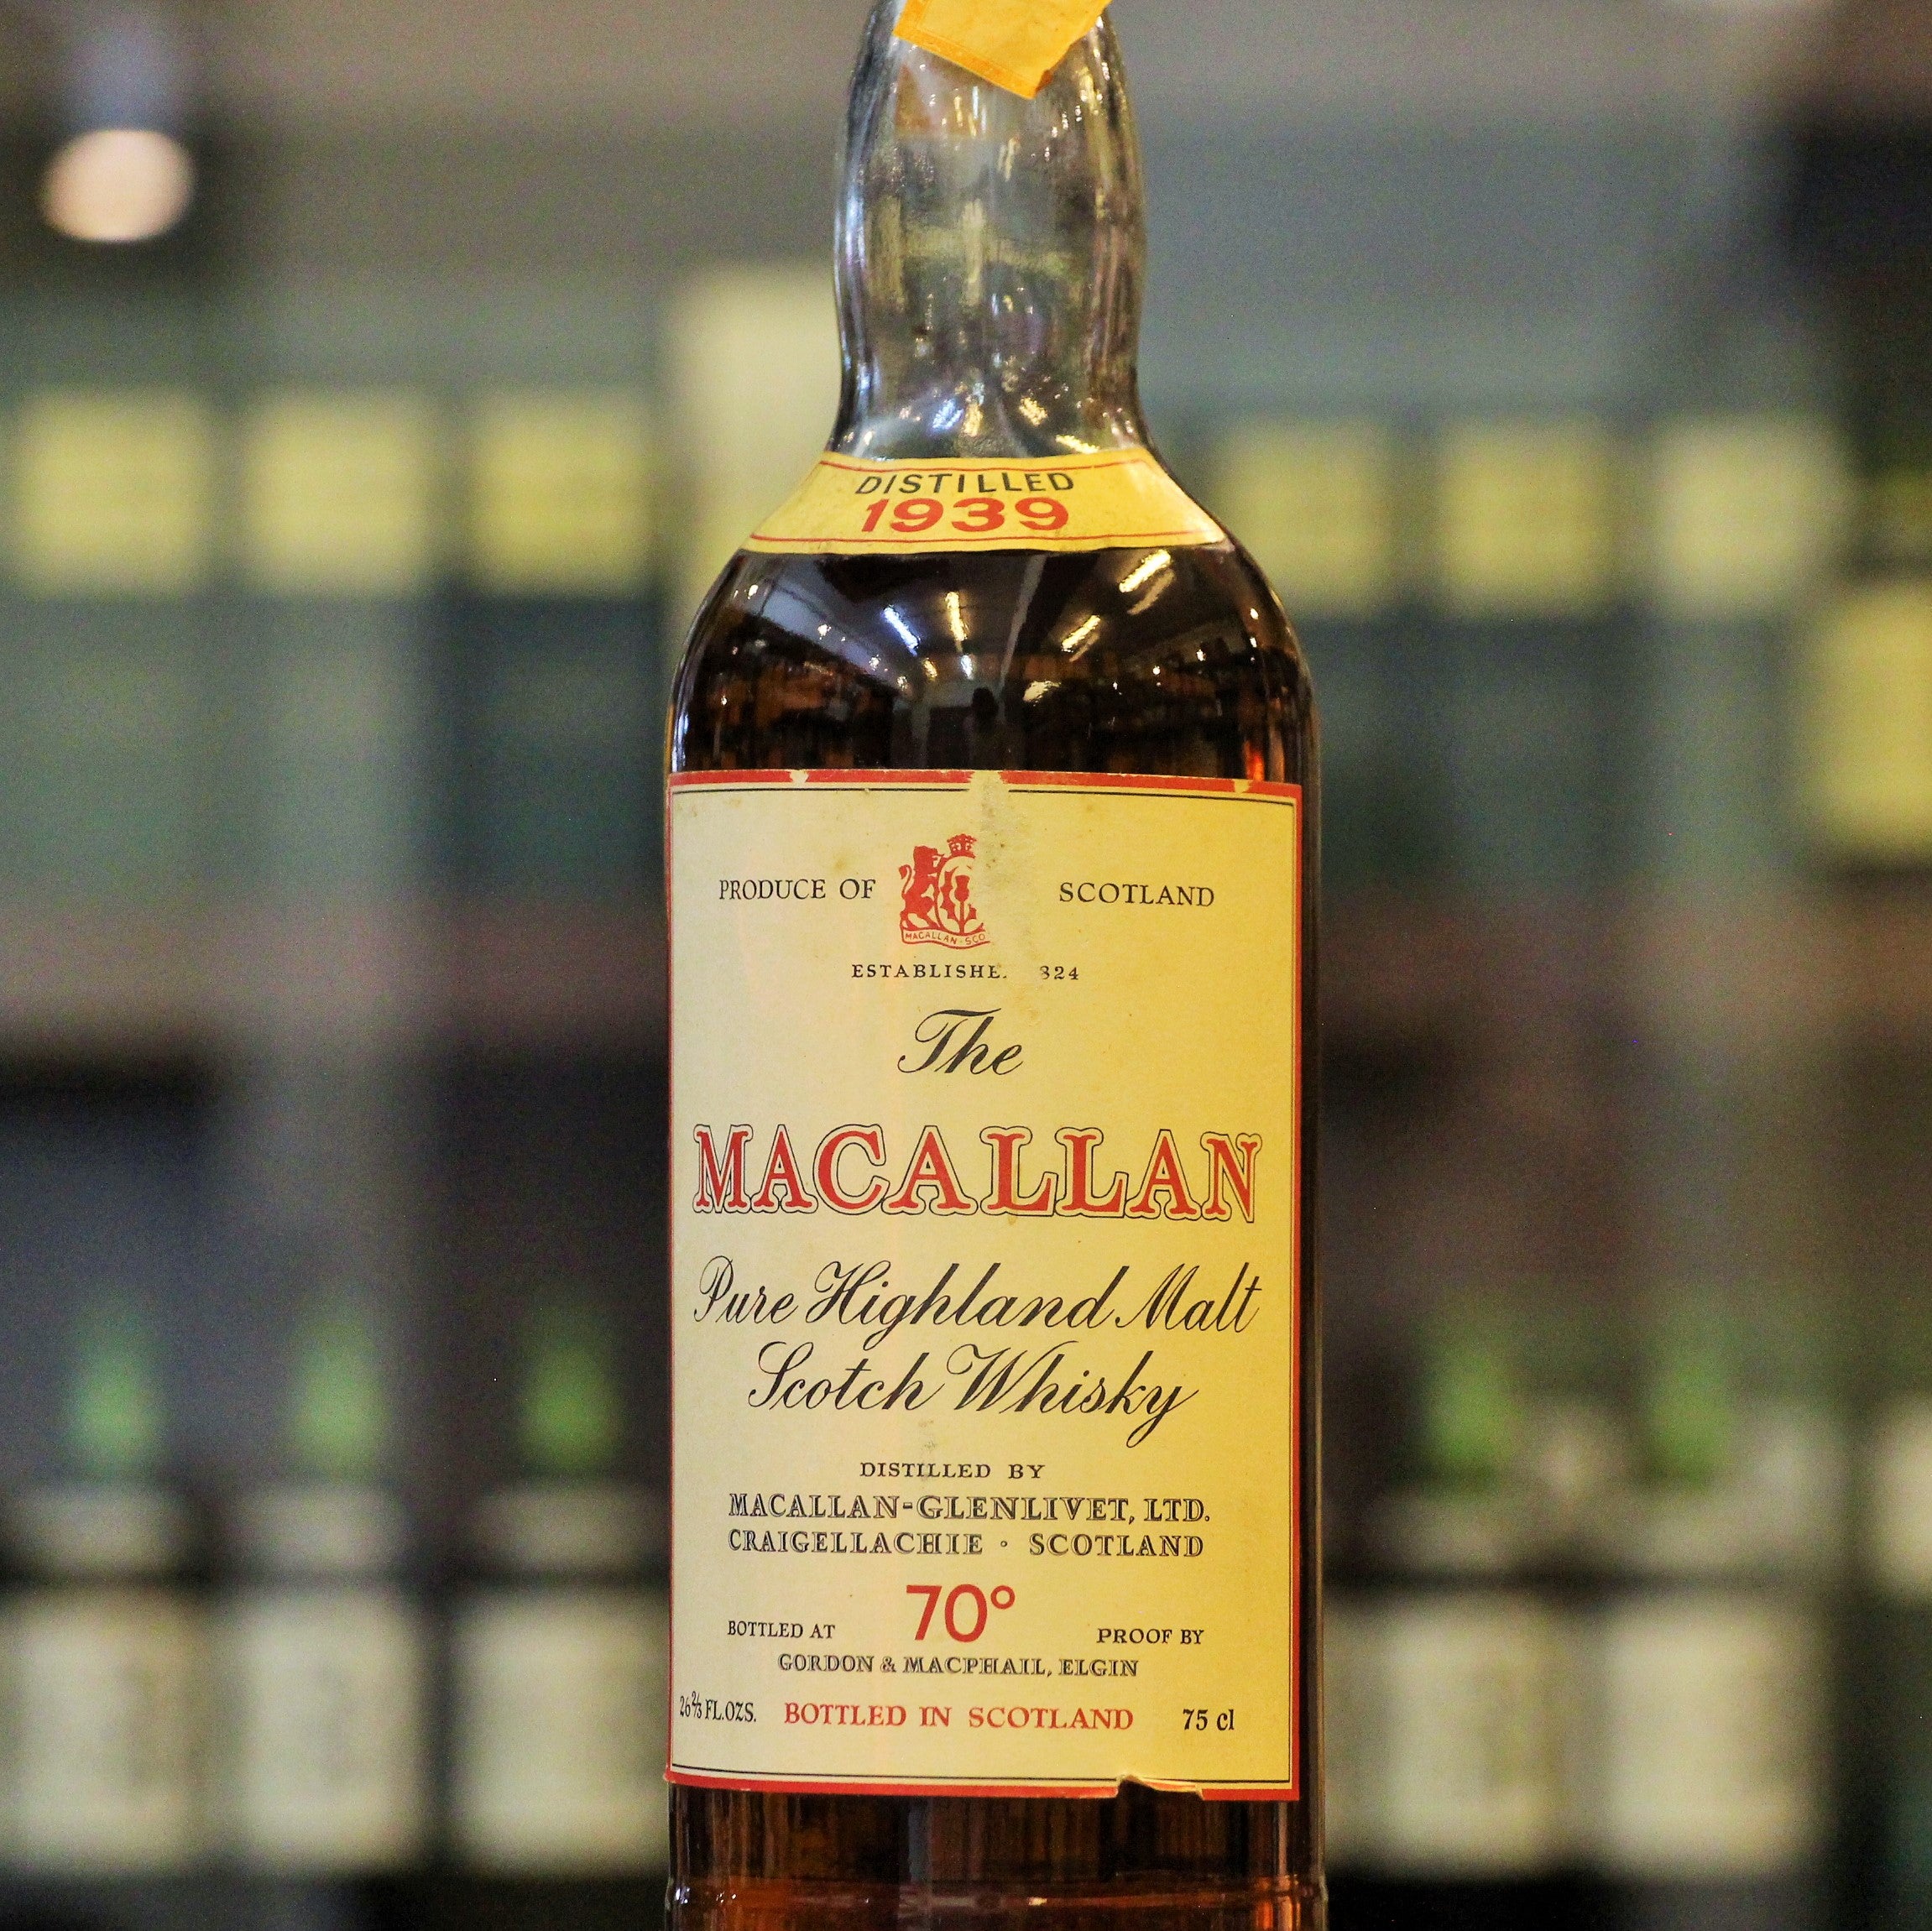 The company mostly used the classic "Macallan-Glenlivet" label, but on occasions used this aesthetic "The Macallan" and more synonymous with Campbell, Hope & King, and favoured by the distillery itself when it took over in 1980. Images of actual bottle. No Box is Available. Sold in "As Is" Condition.